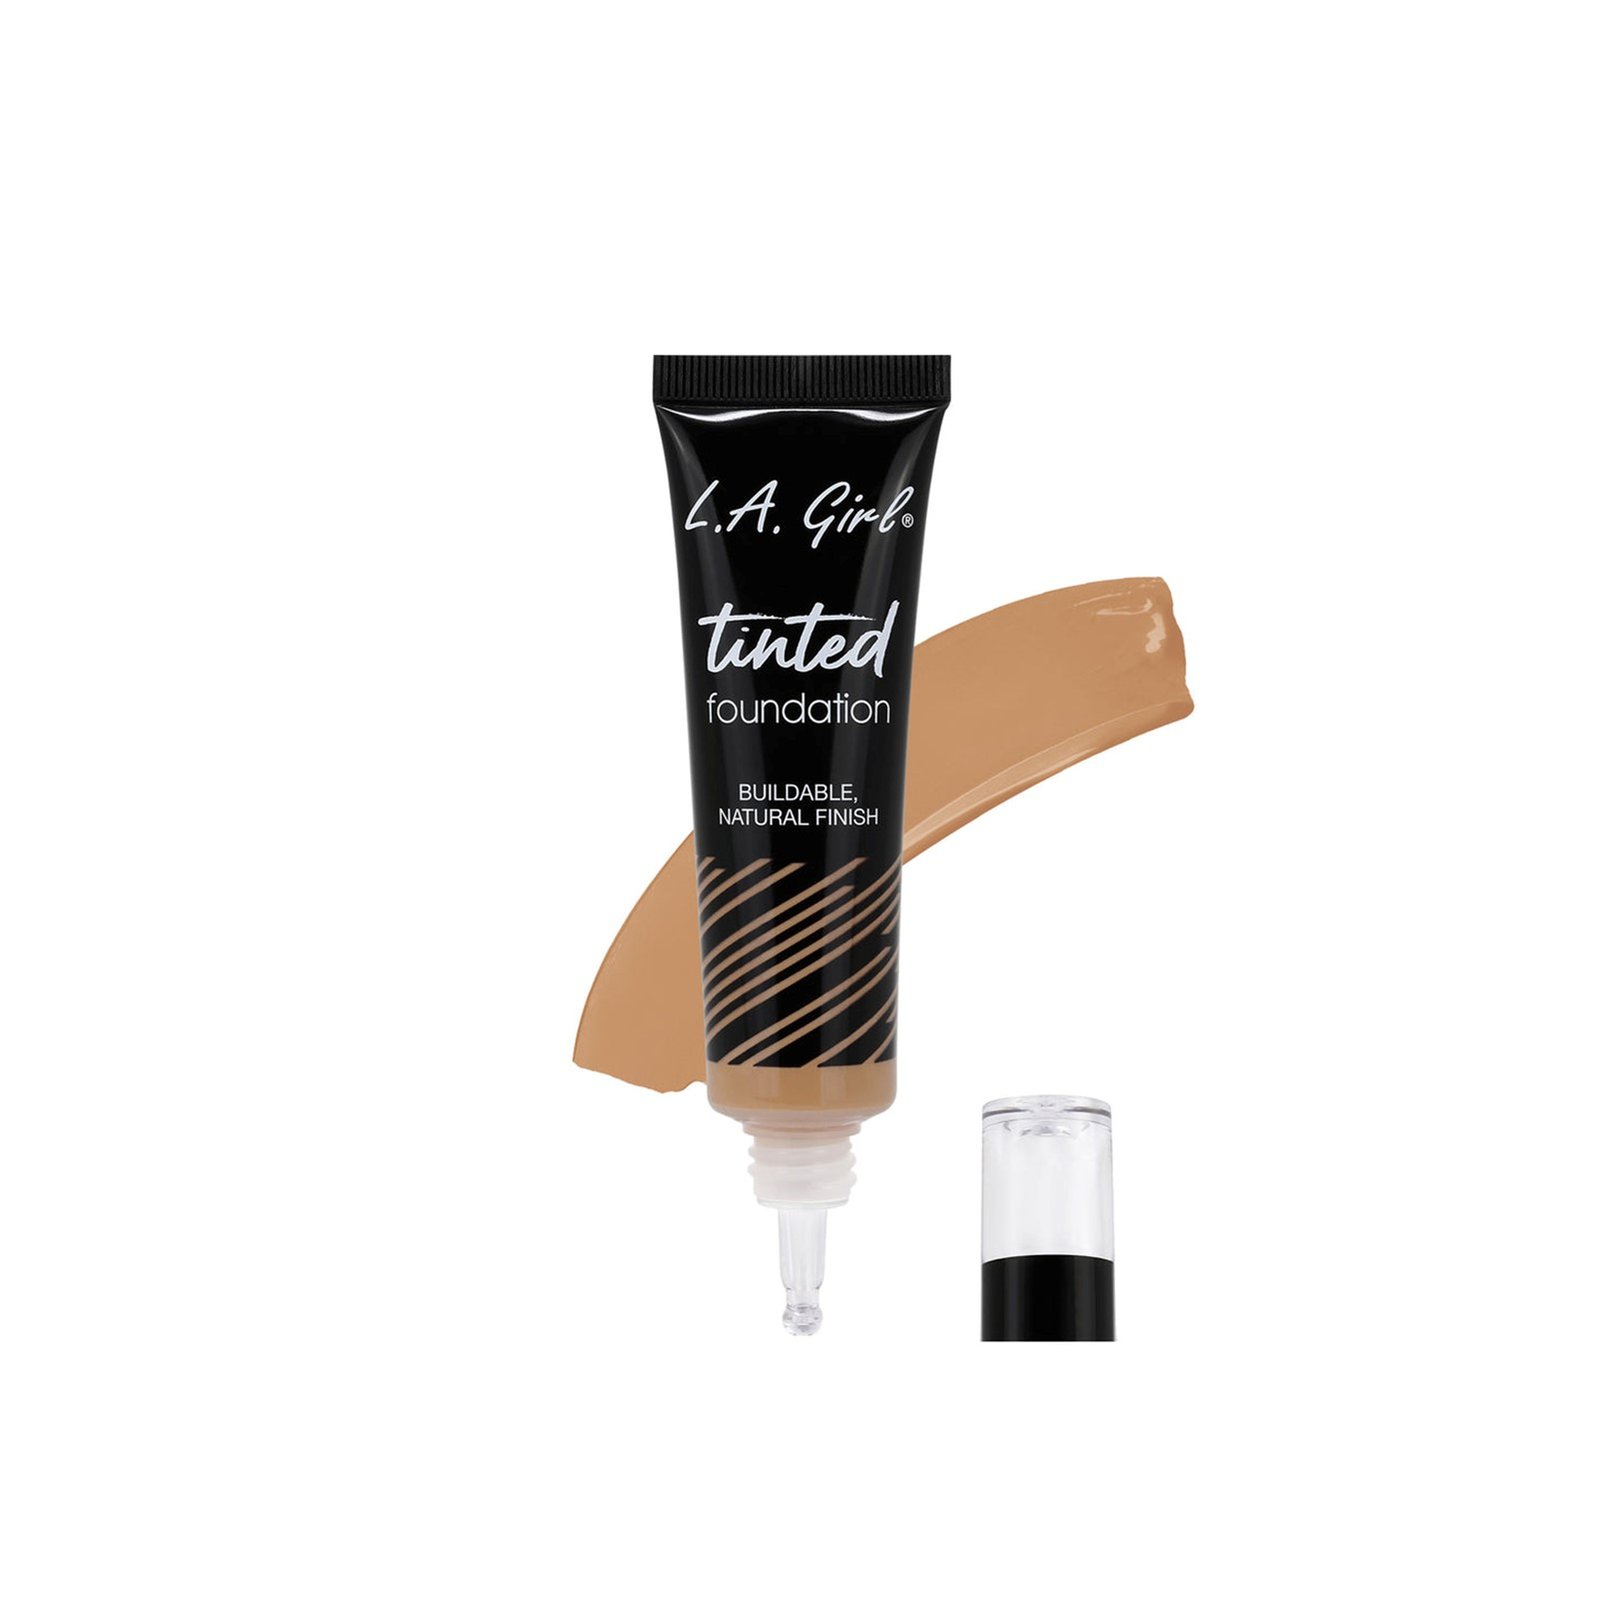 L.A. Girl Tinted Foundation